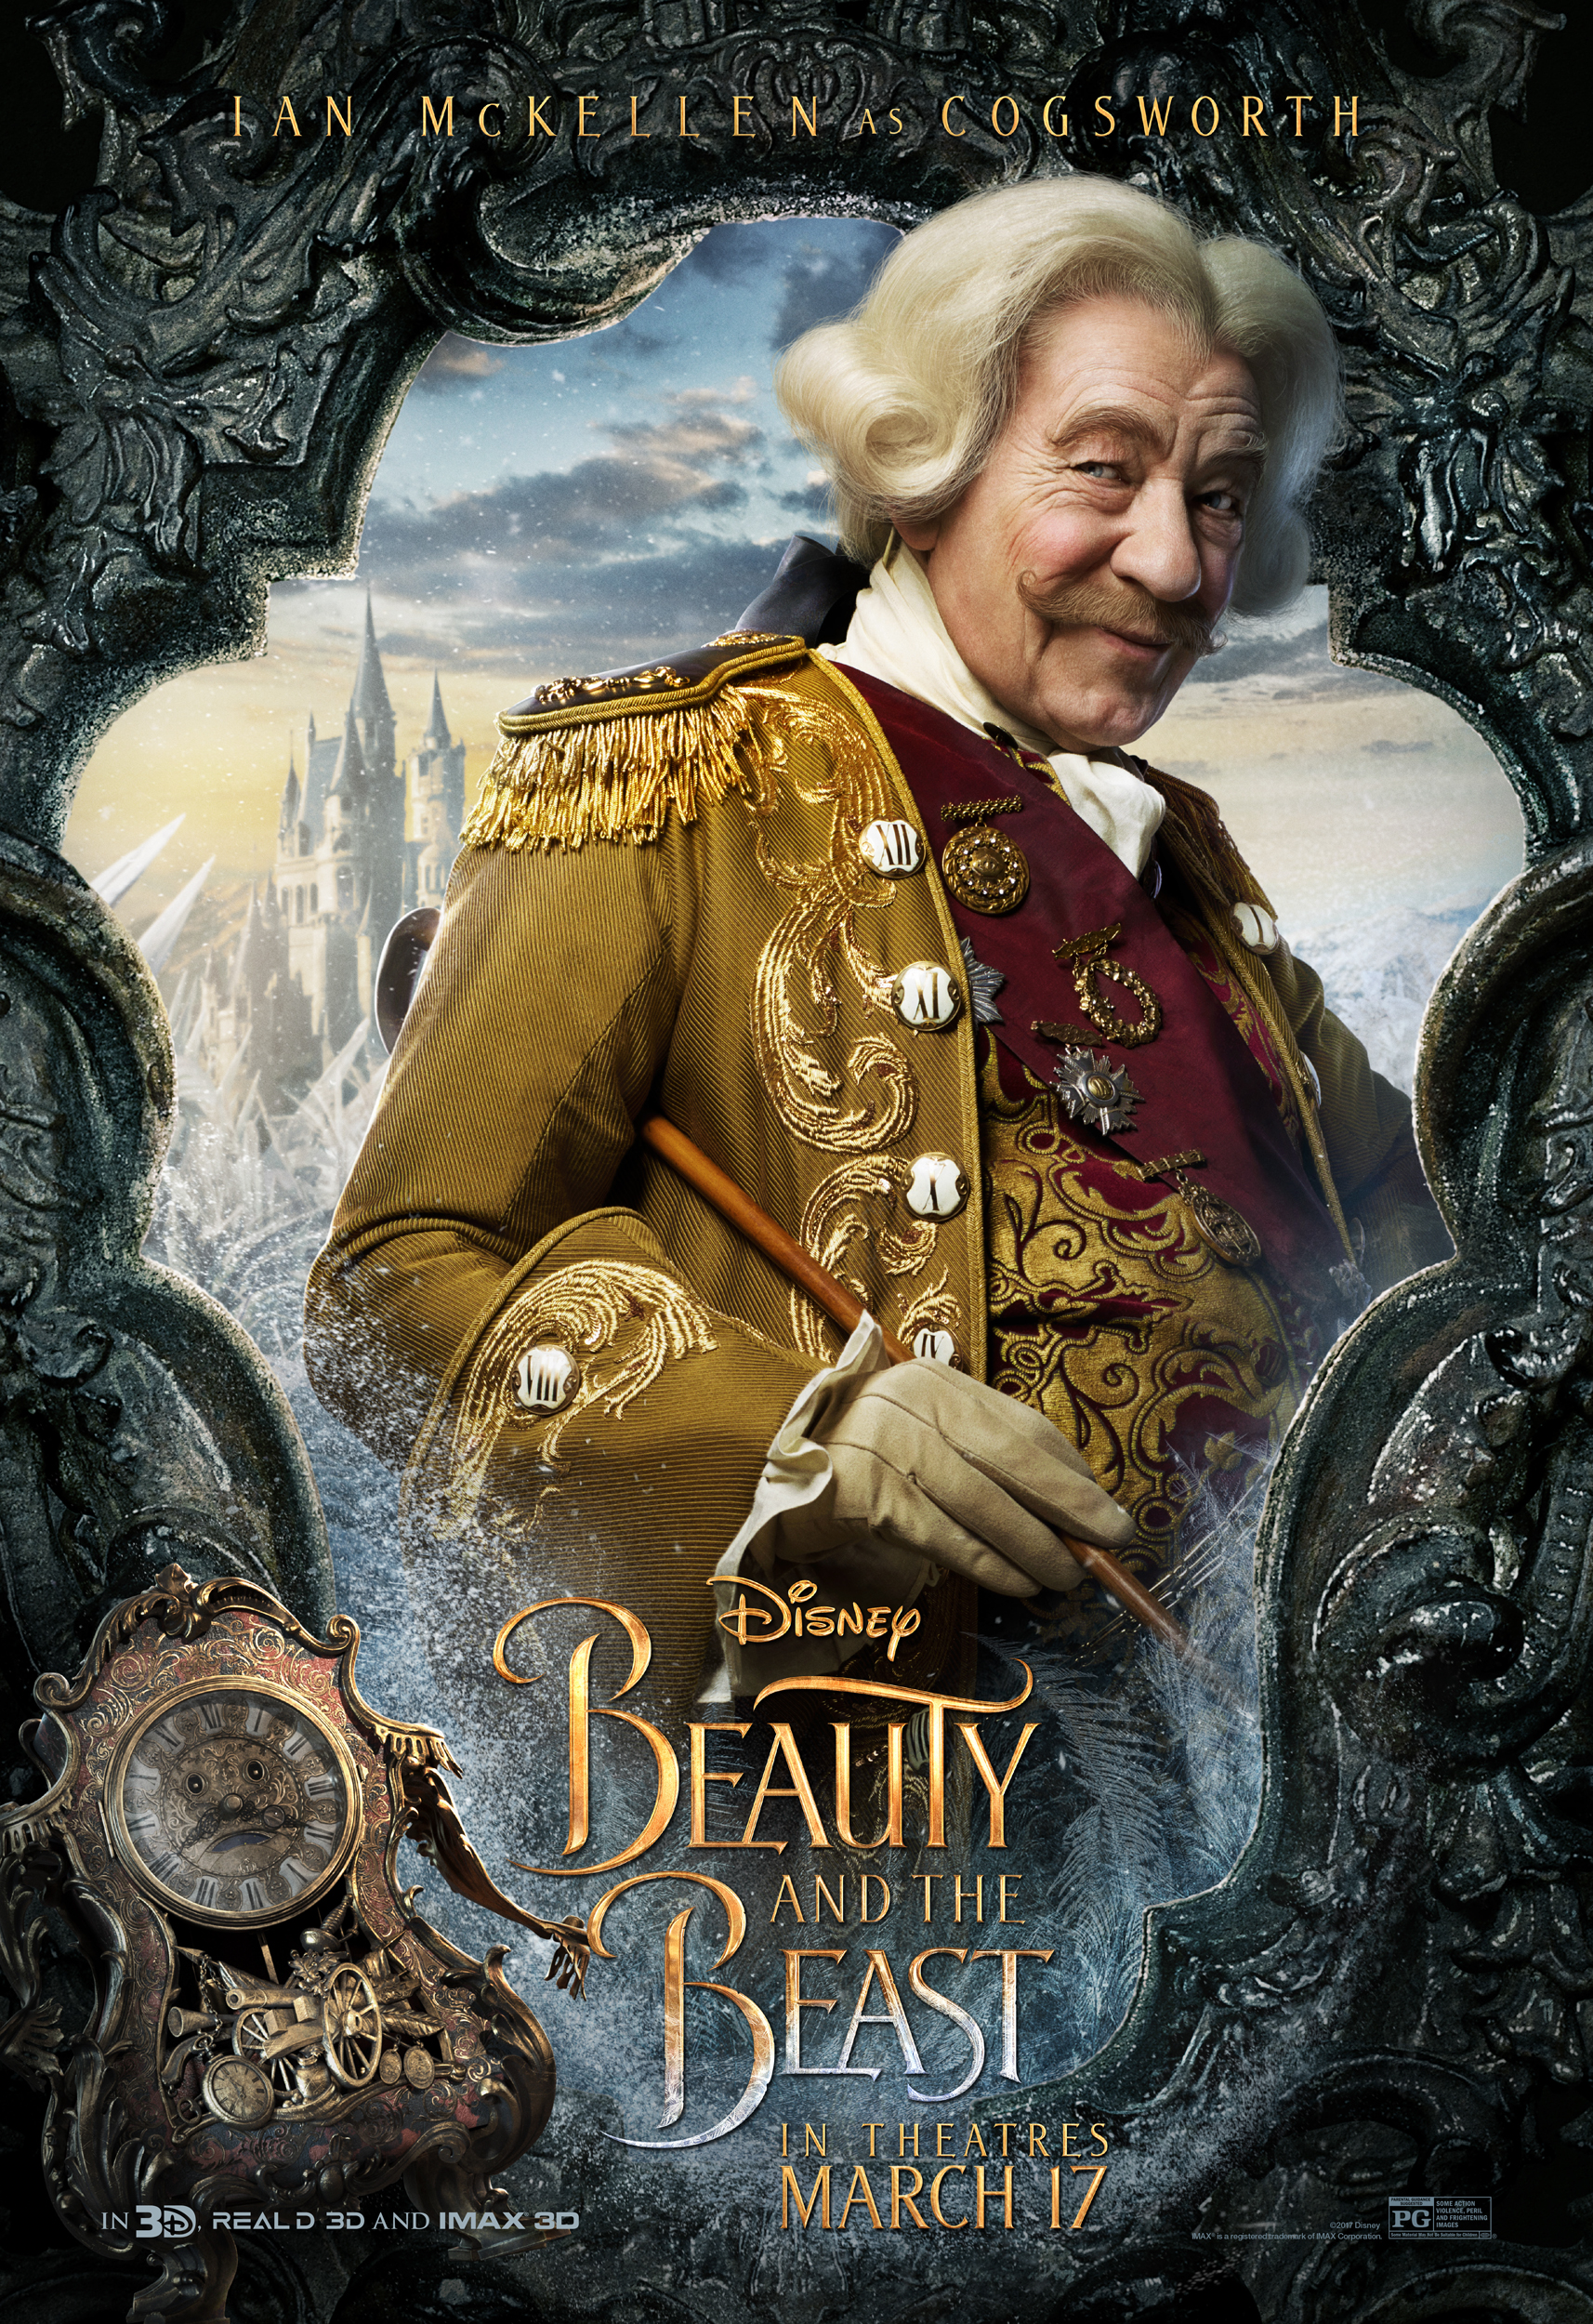 NEW Beauty and the Beast Character Posters #BeOurGuest